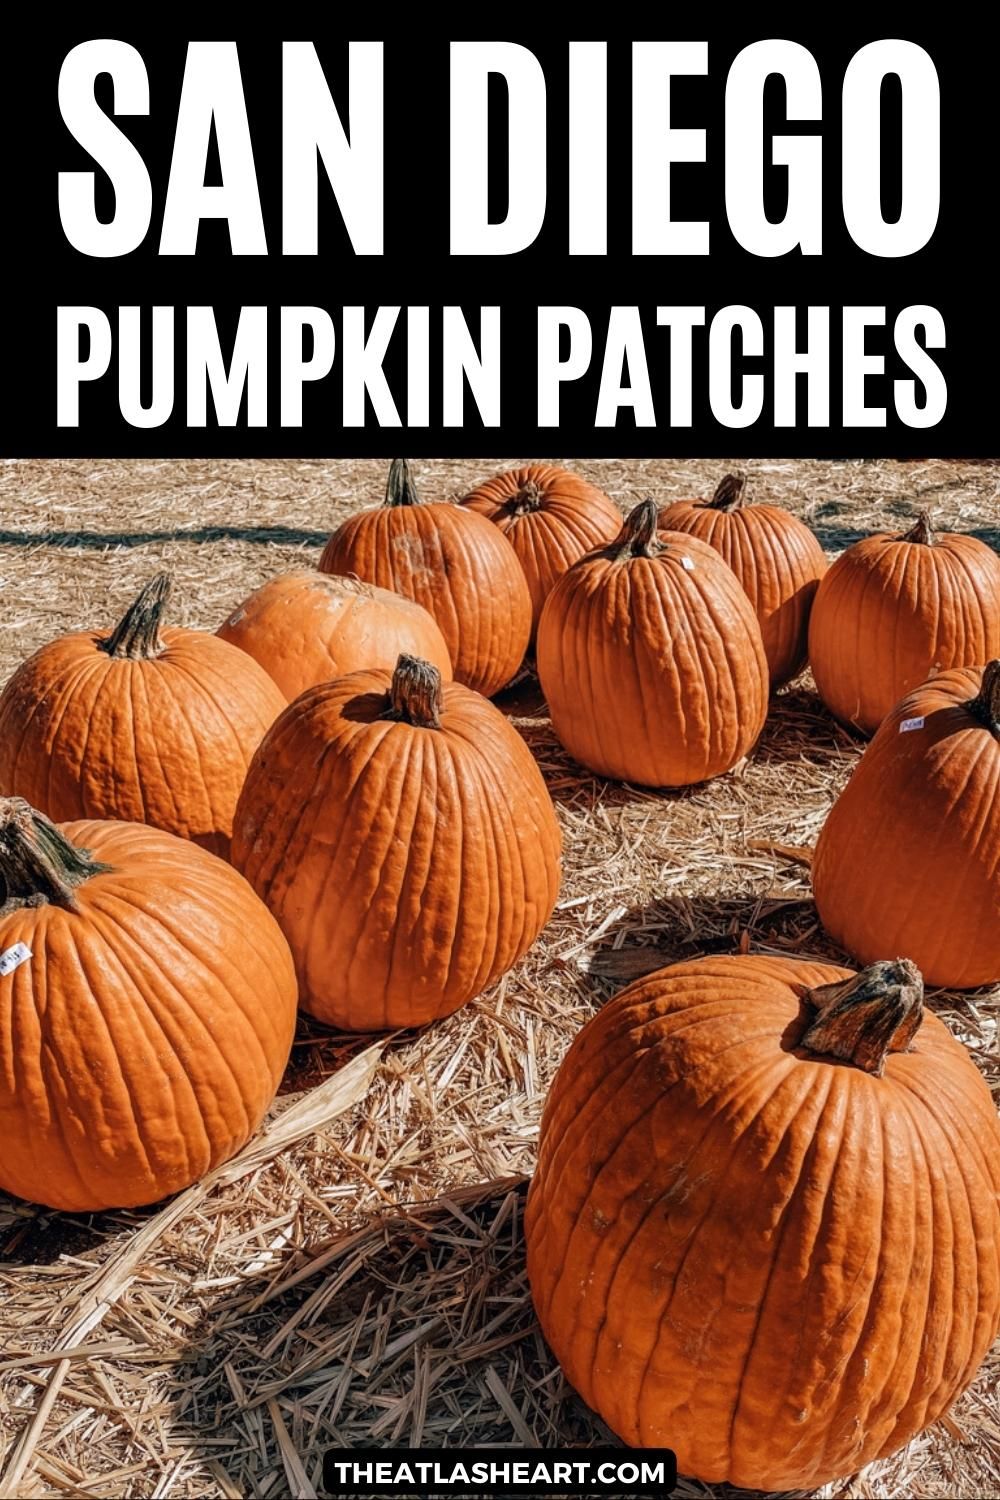 A close-up image of eleven pumpkins sitting on a hay-covered ground, with the text overlay, "Best Pumpkin Patches in San Diego."